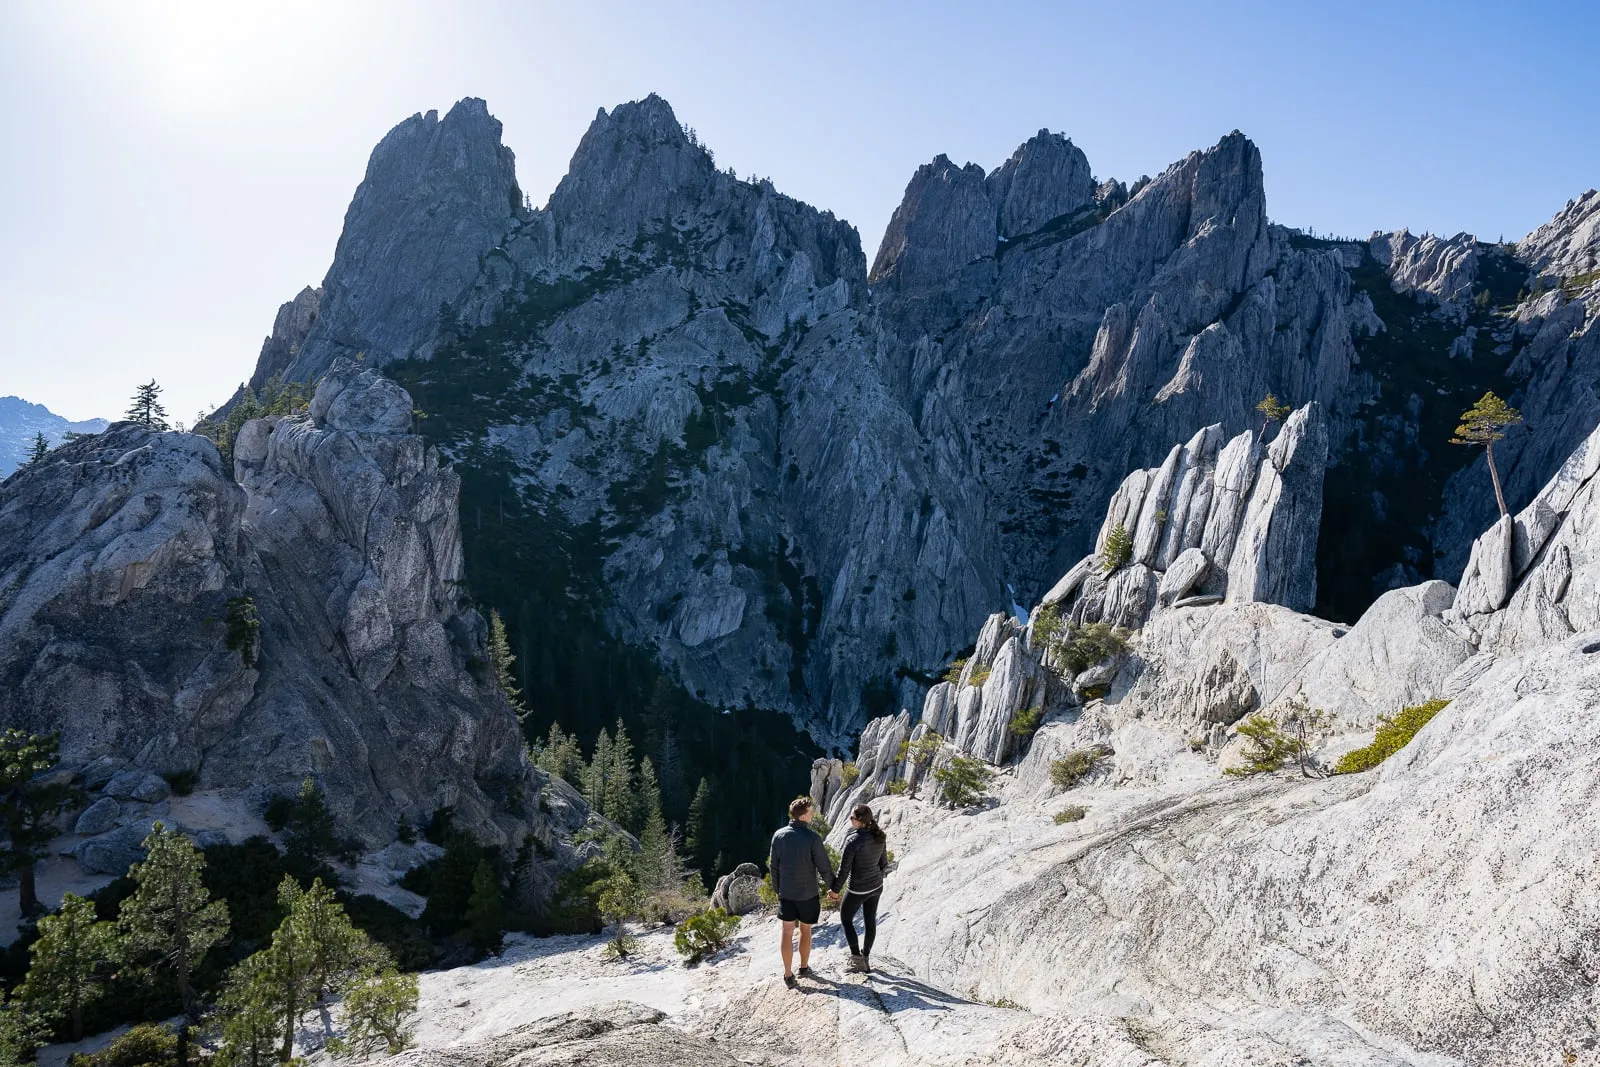 The Ultimate Hiking Guide: Our top hiking tips!